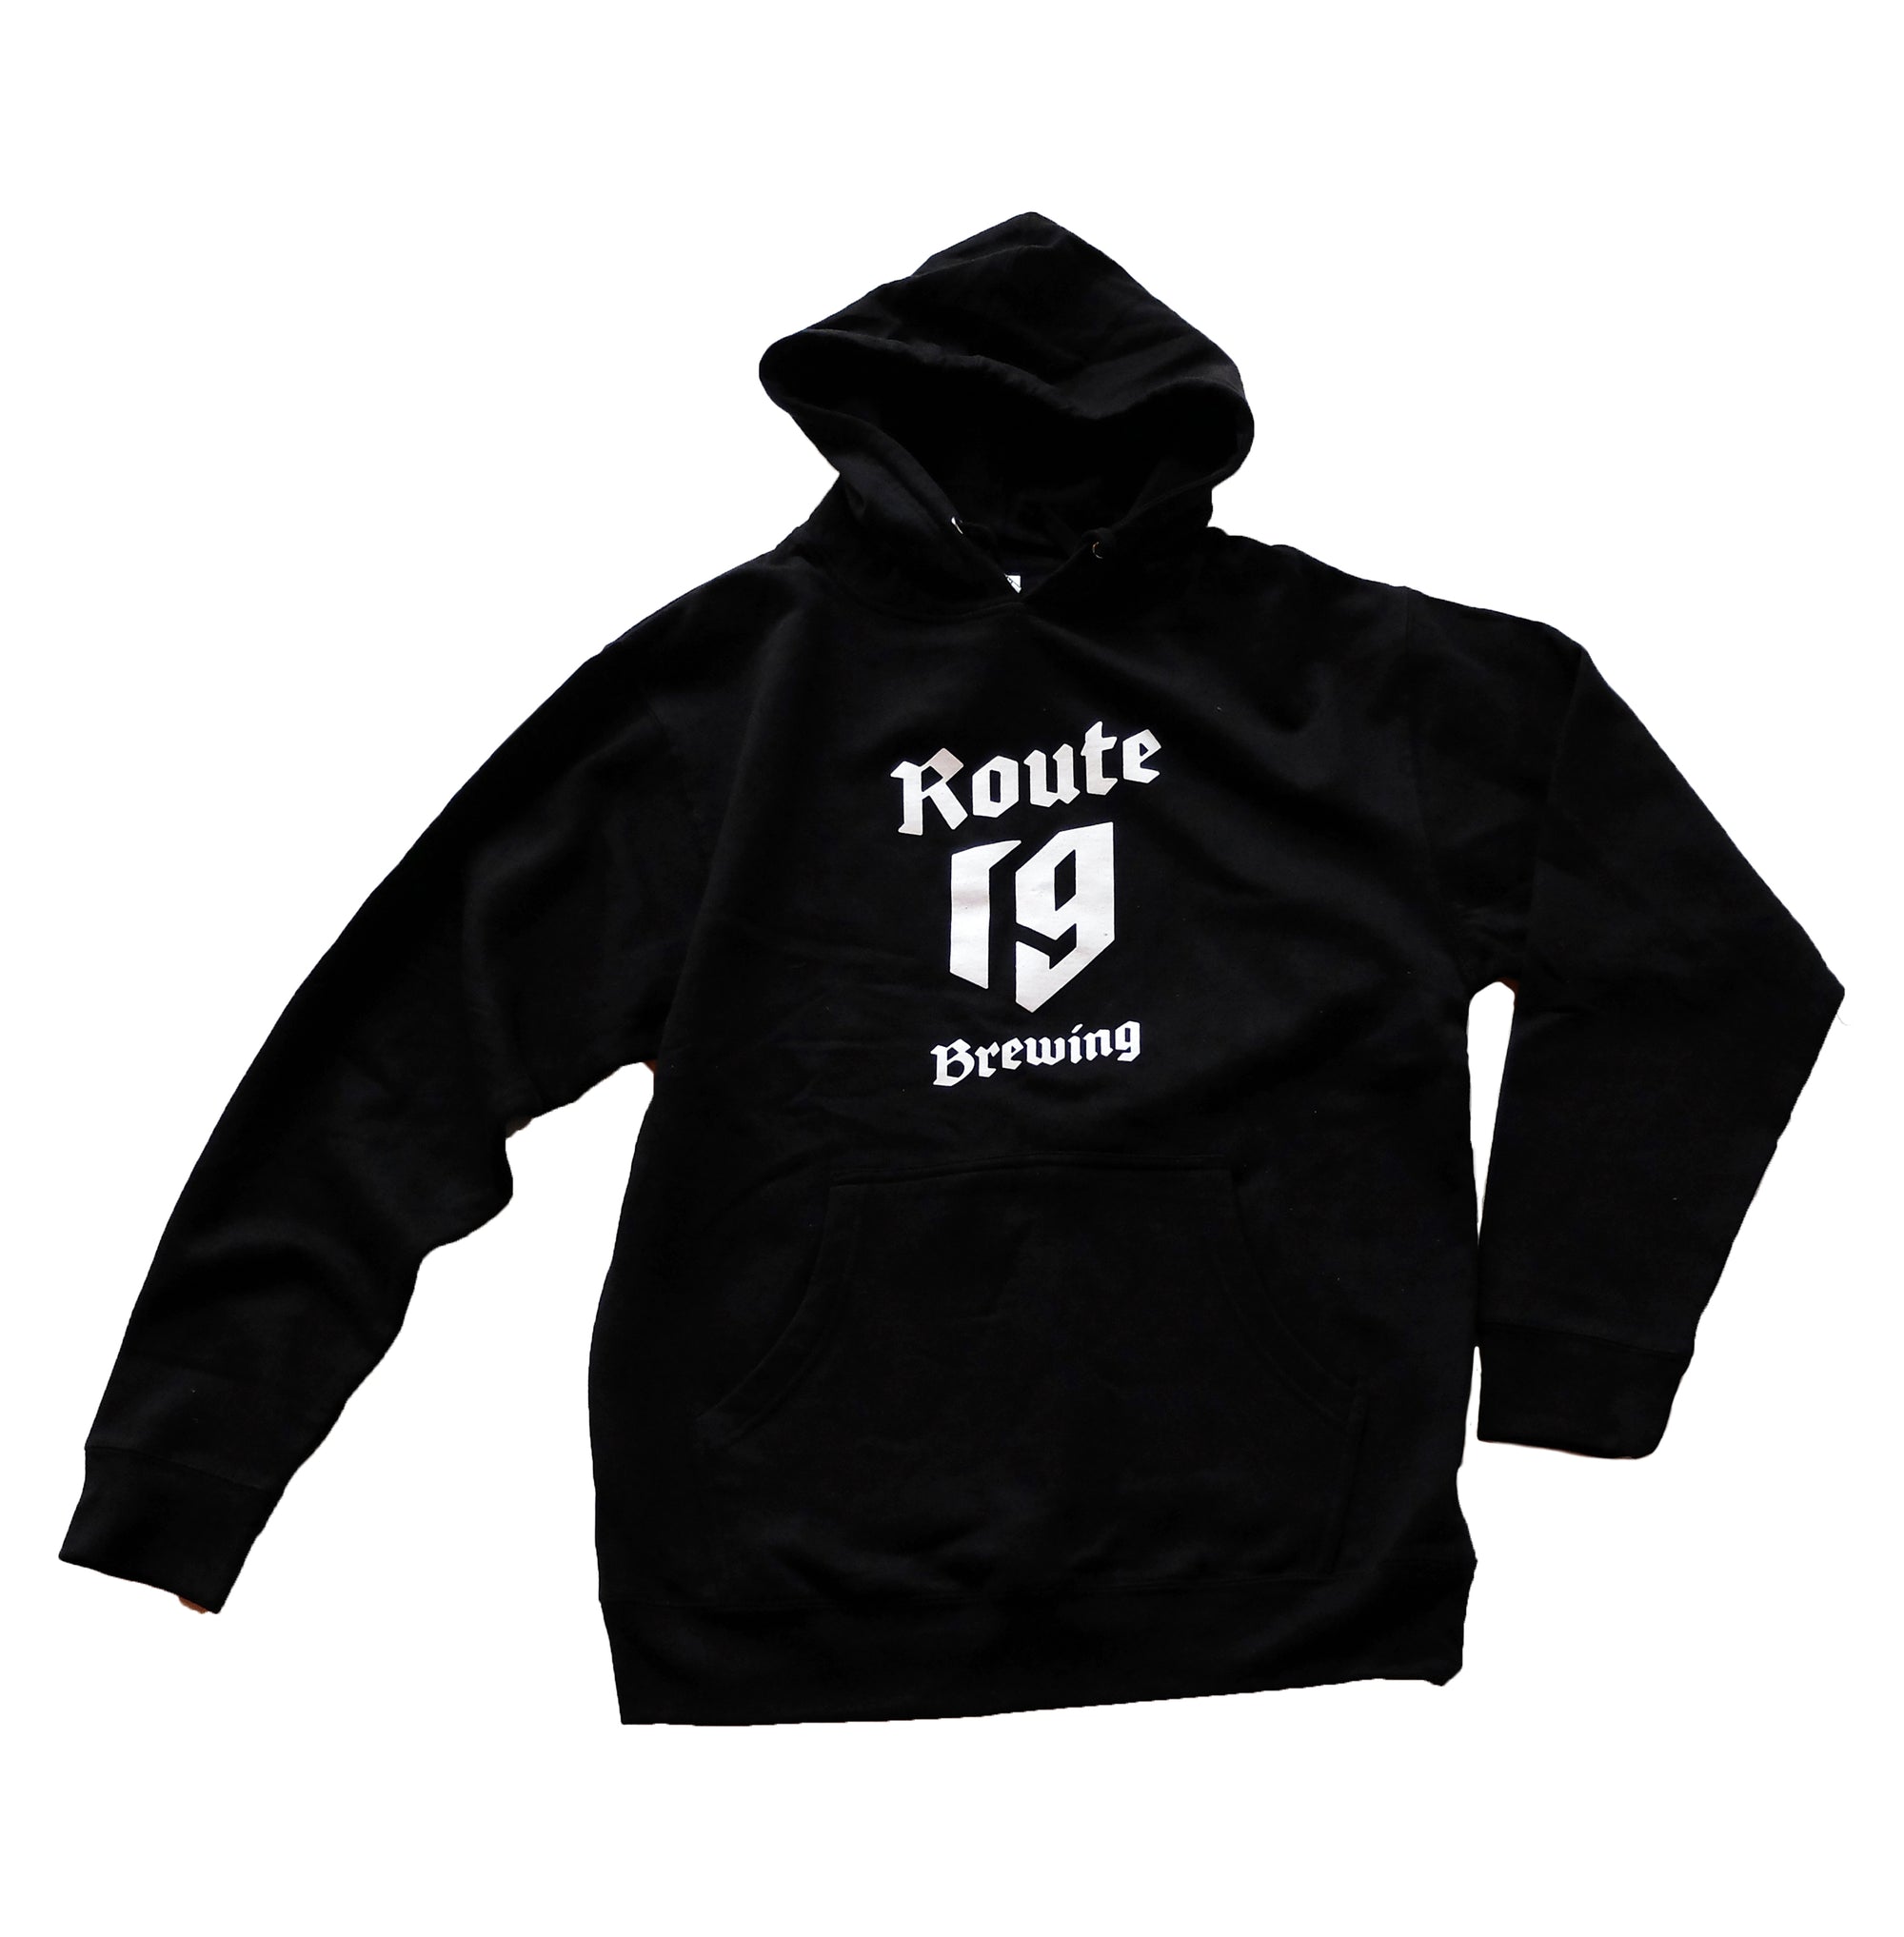 Classic Hoodie - Unisex 'Route 19 Brewing'